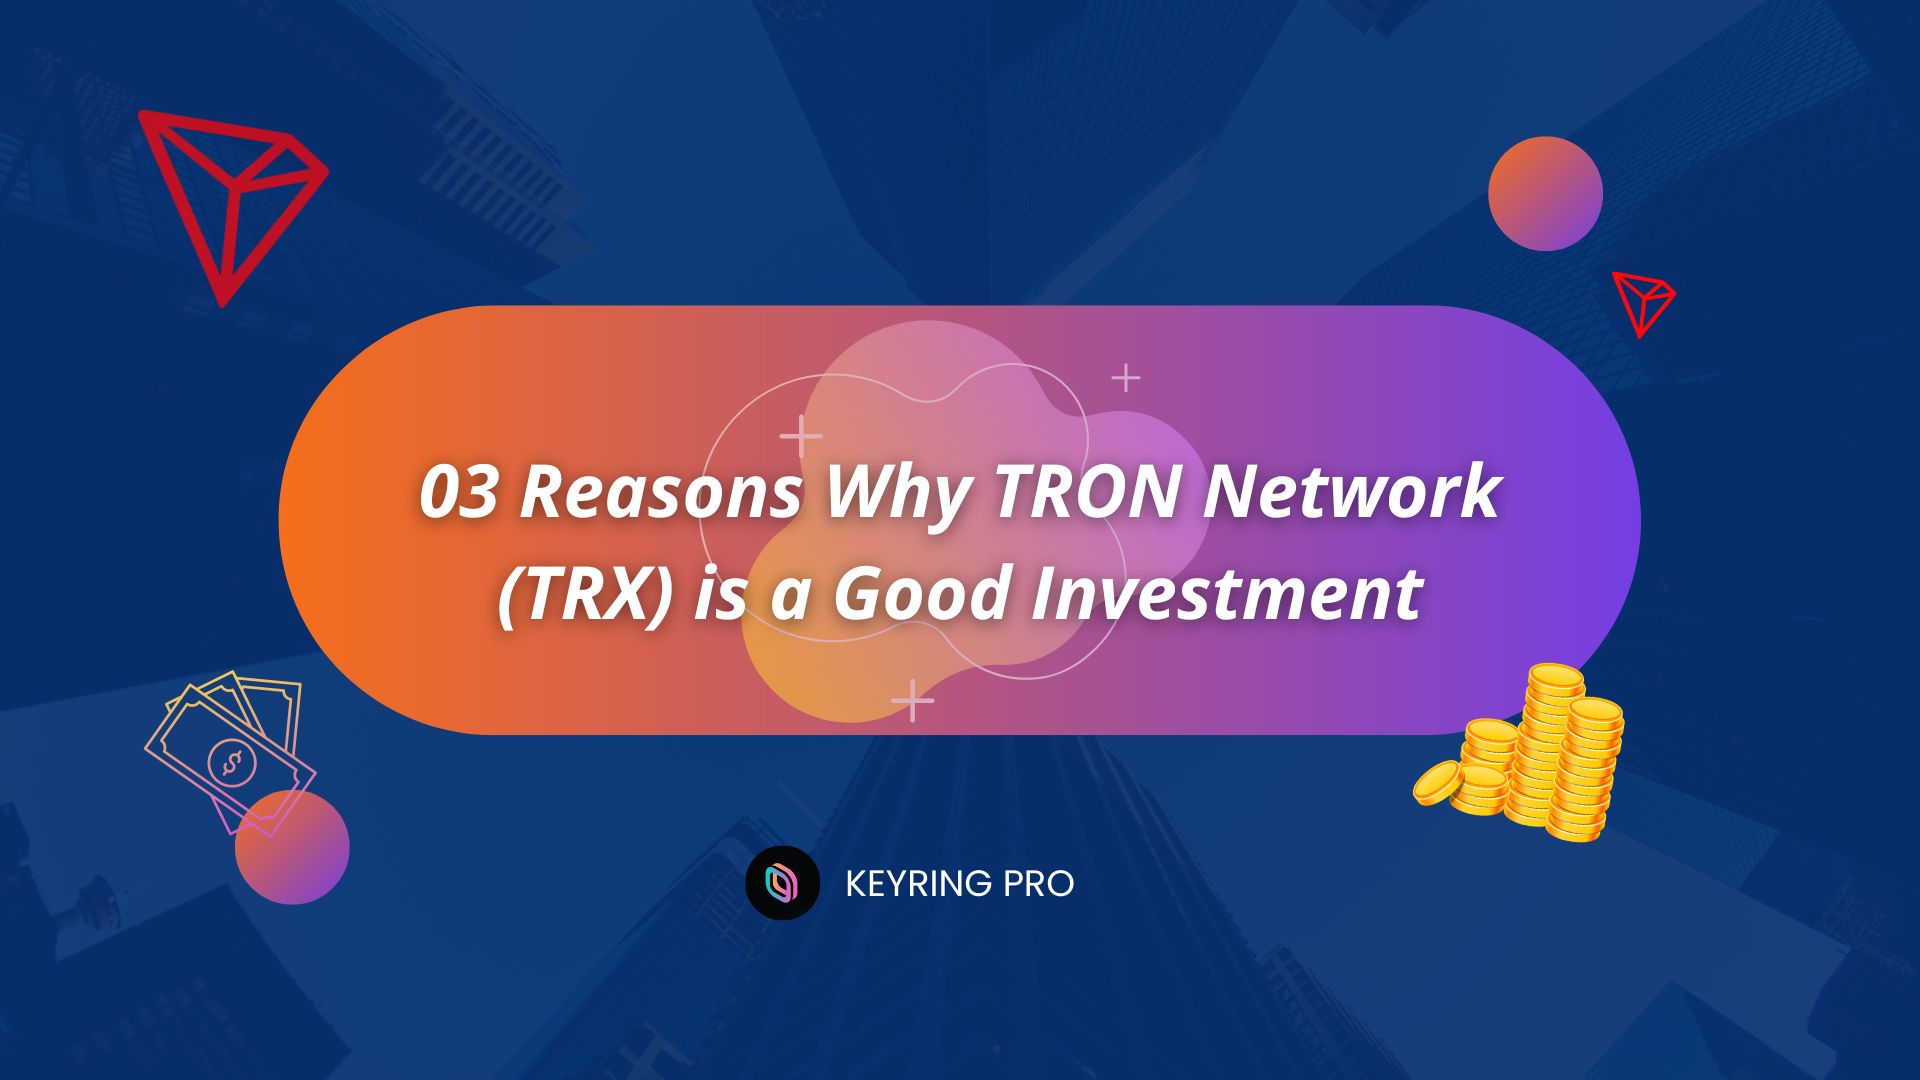 TRON featured image